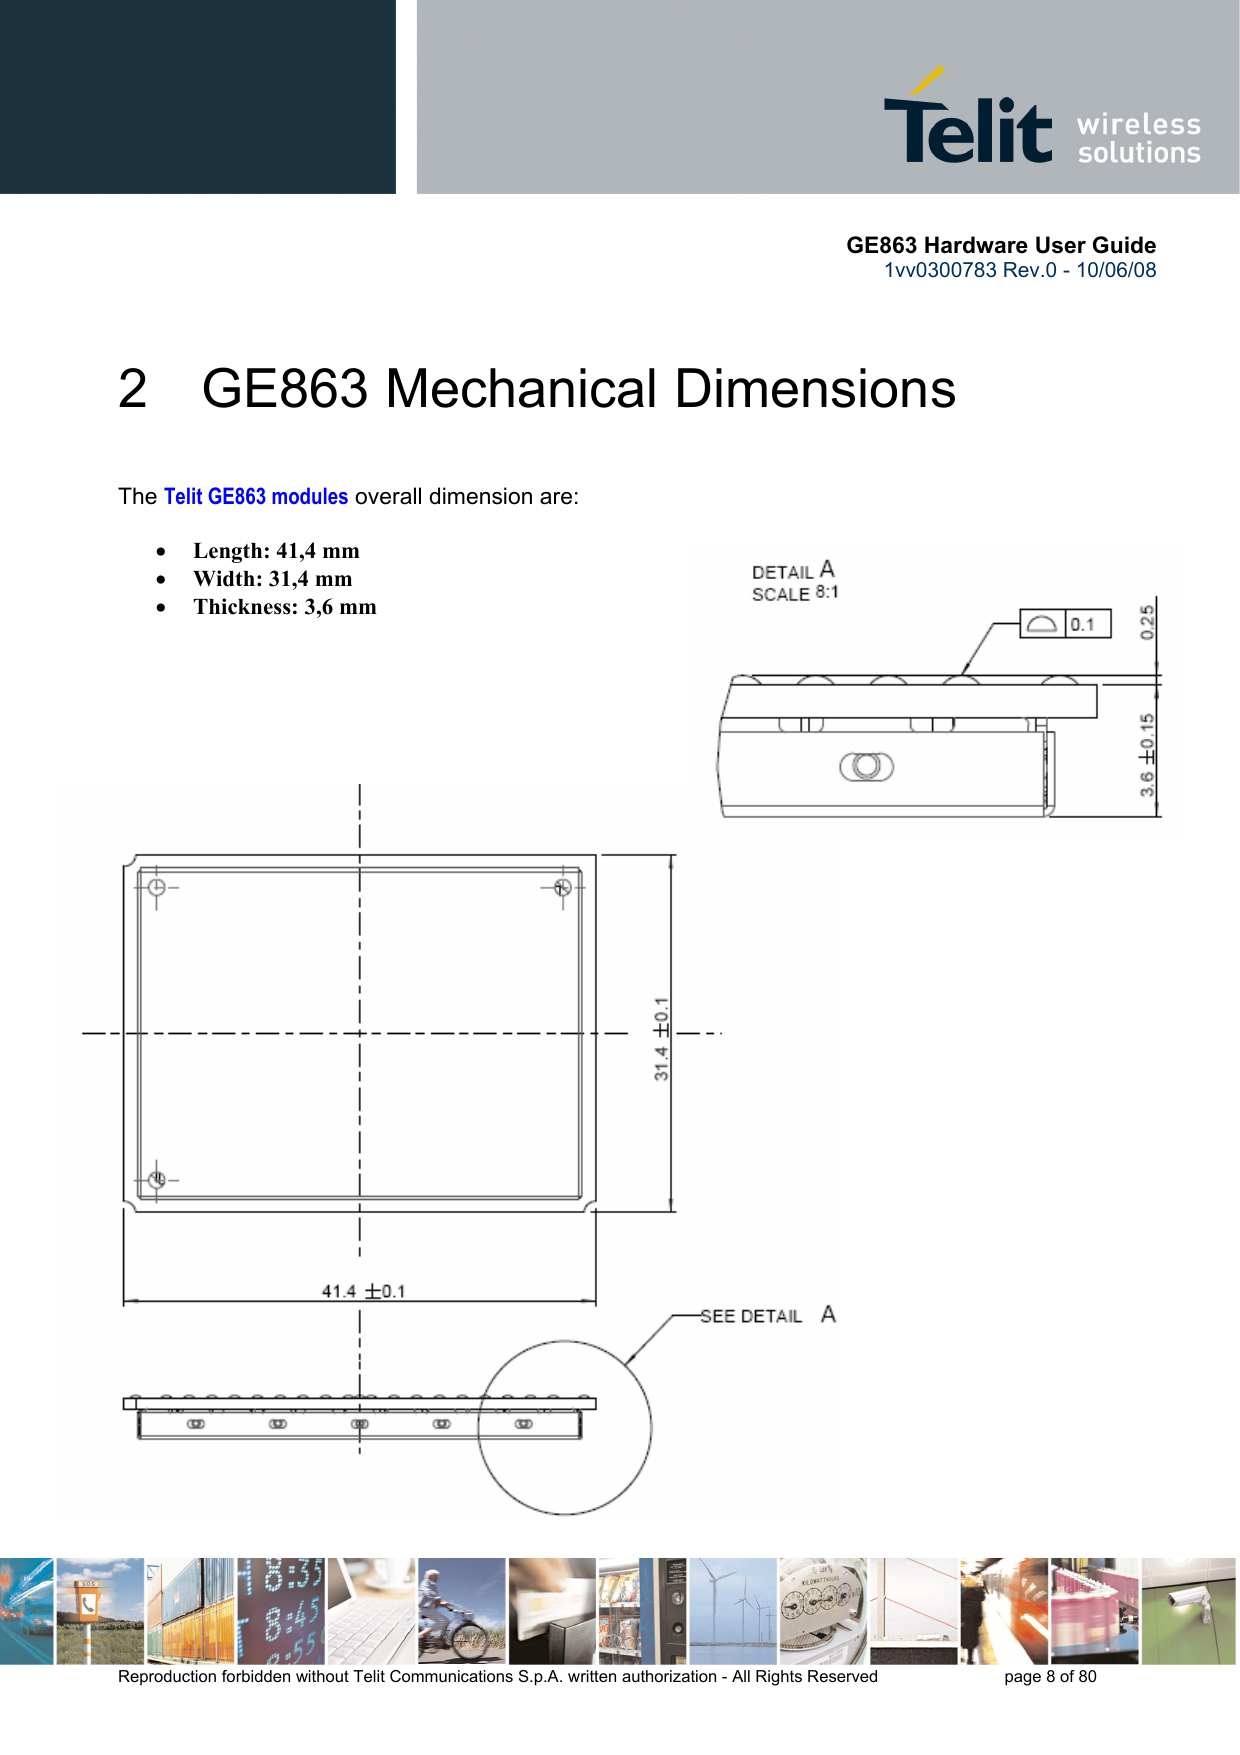       GE863 Hardware User Guide 1vv0300783 Rev.0 - 10/06/08 Reproduction forbidden without Telit Communications S.p.A. written authorization - All Rights Reserved    page 8 of 80  2 GE863 Mechanical Dimensions  The Telit GE863 modules overall dimension are:  • Length: 41,4 mm • Width: 31,4 mm • Thickness: 3,6 mm       